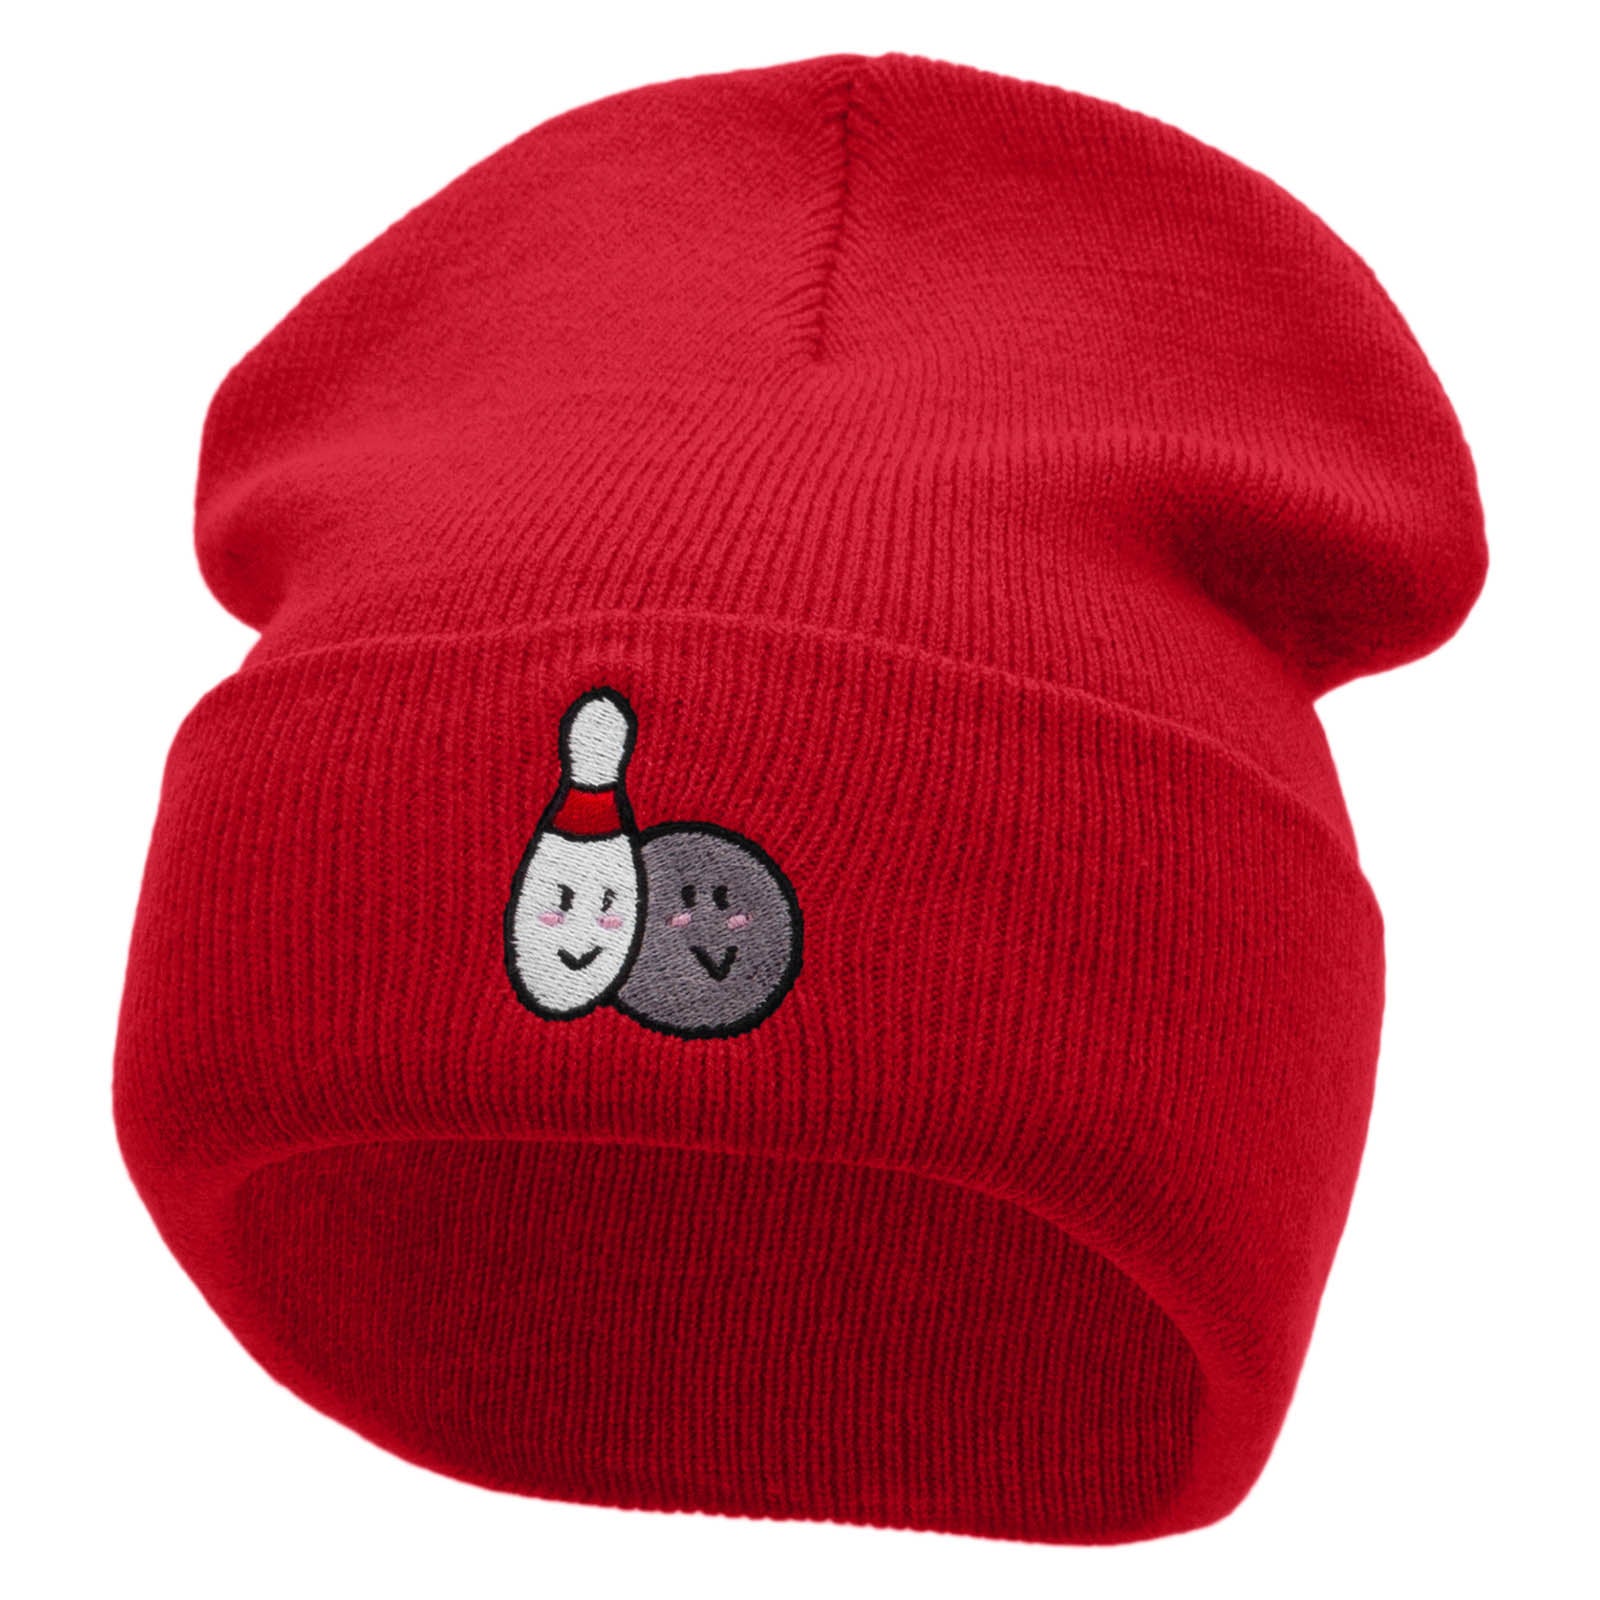 Bowling Smilies Embroidered 12 Inch Long Knitted Beanie - Red OSFM